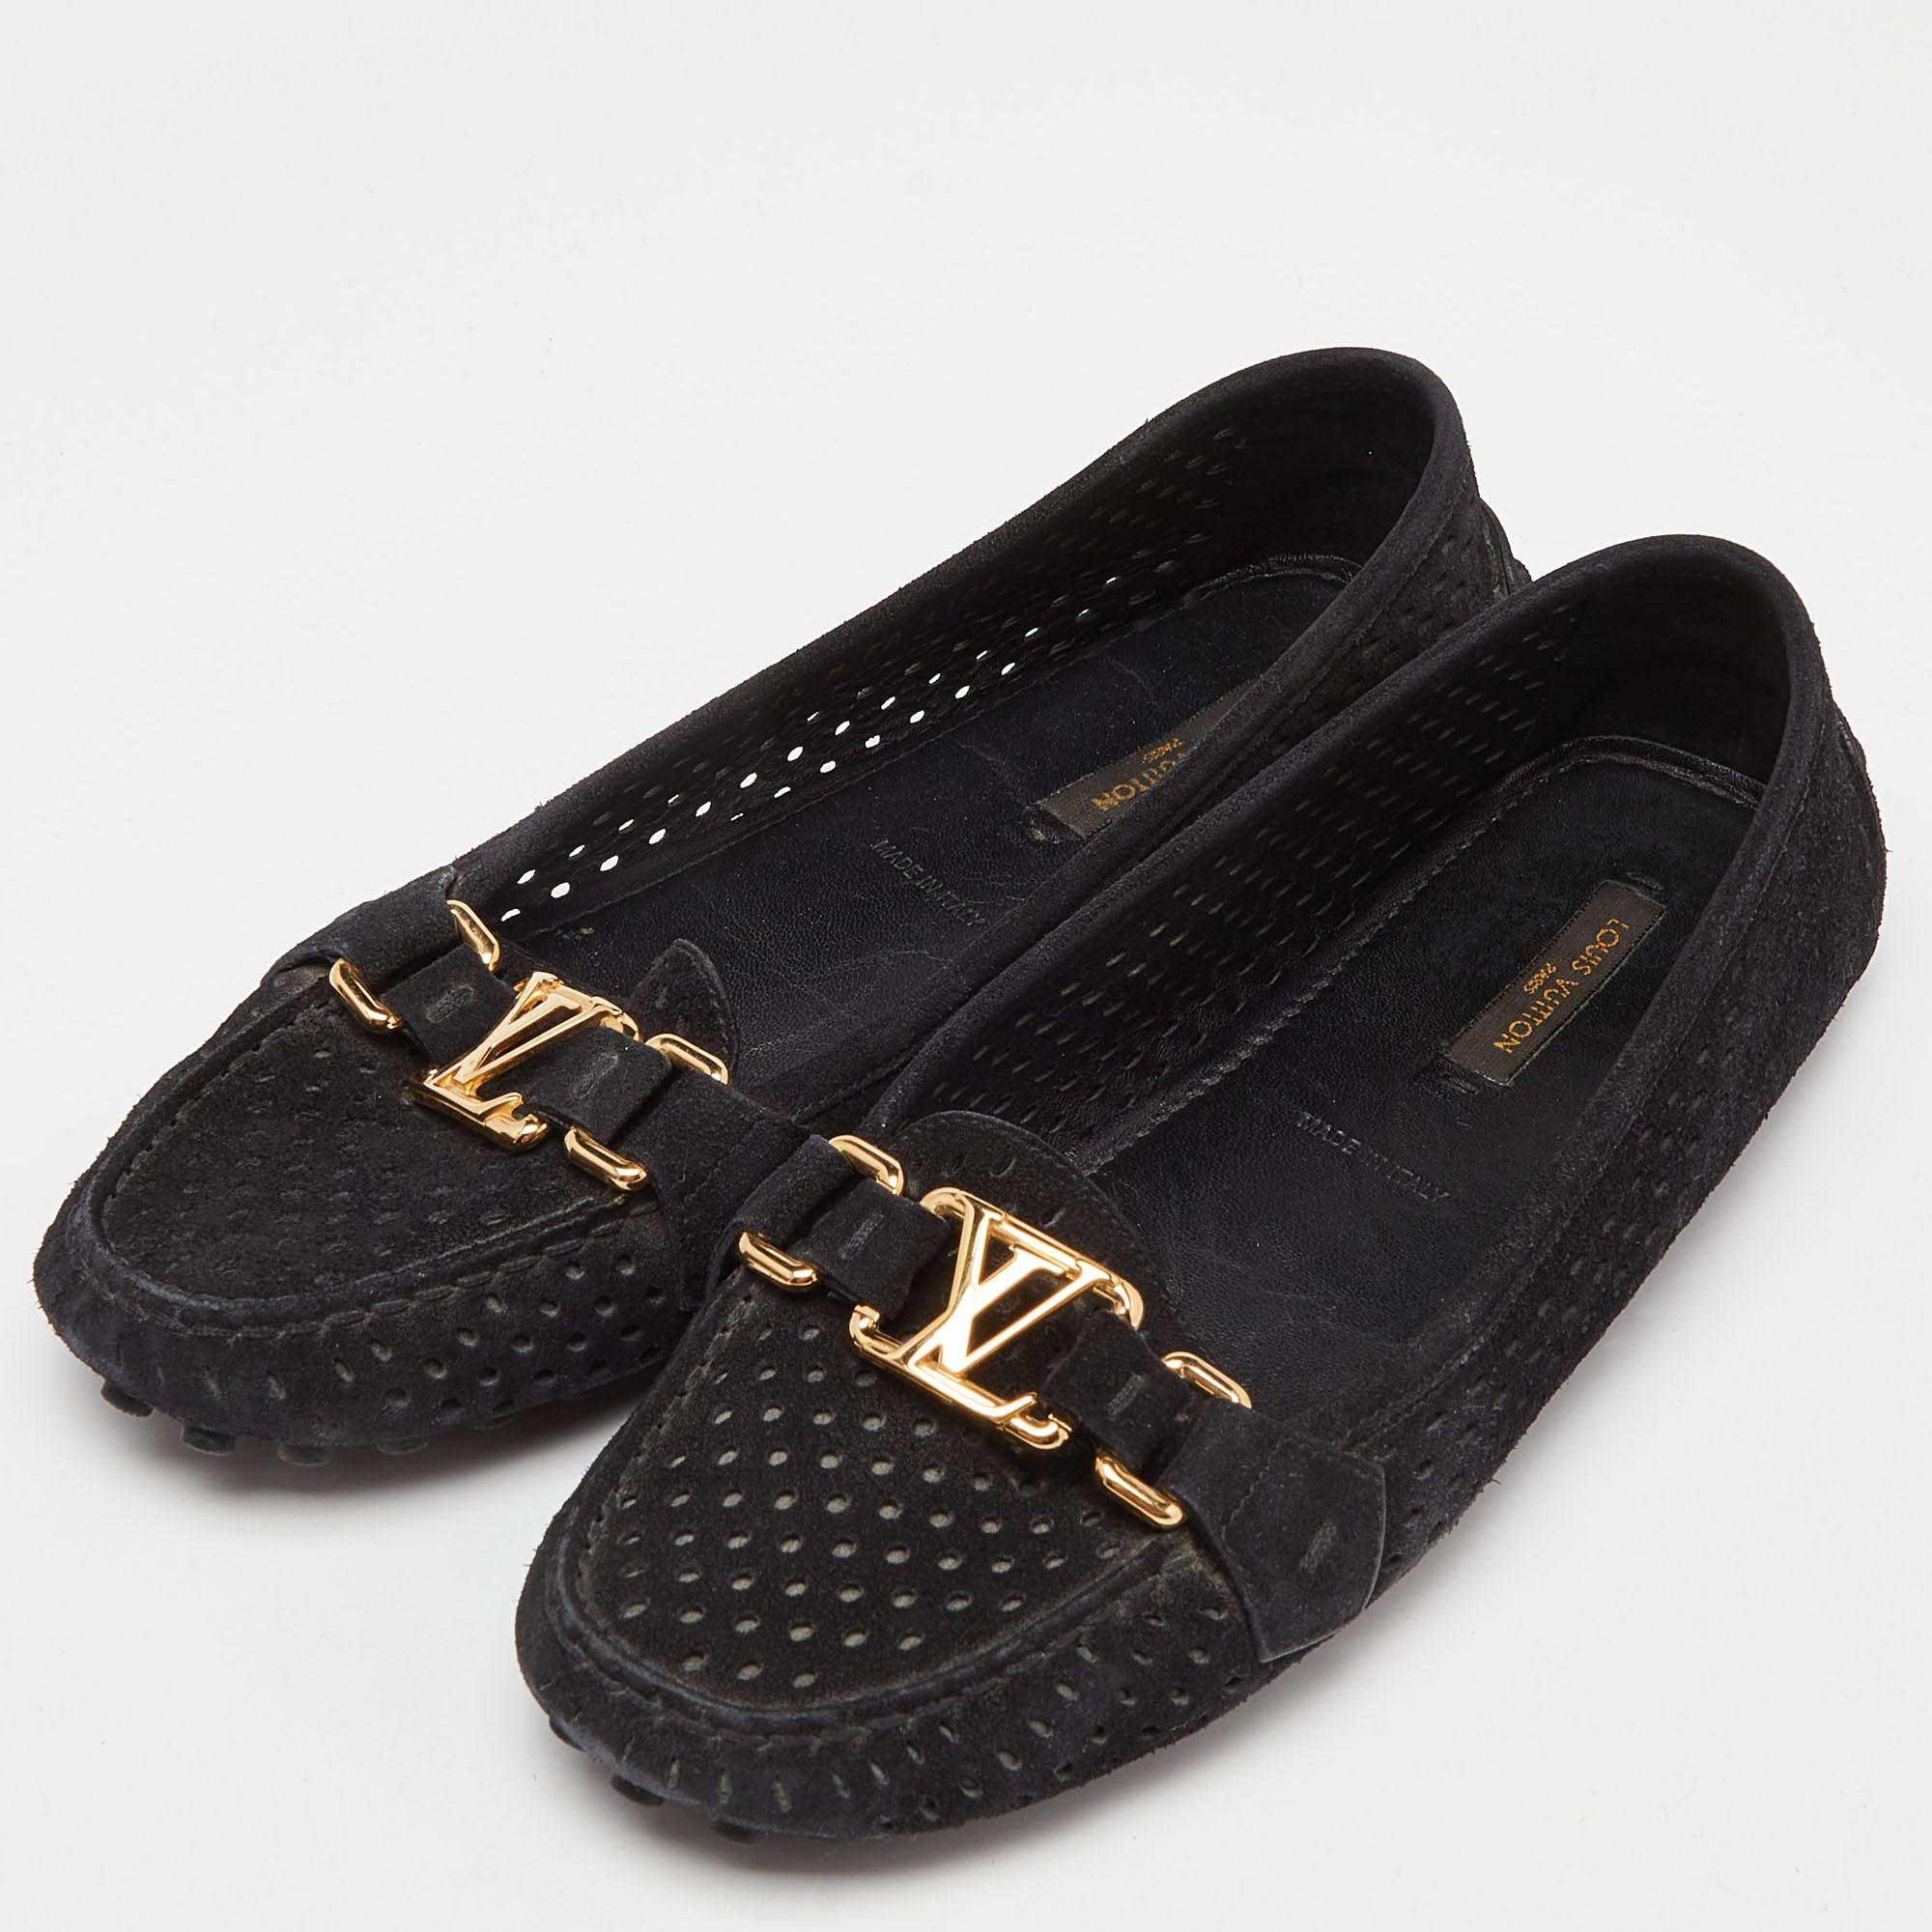 Louis Vuitton Black Leather Oxford Loafers Size 37.5 For Sale 4